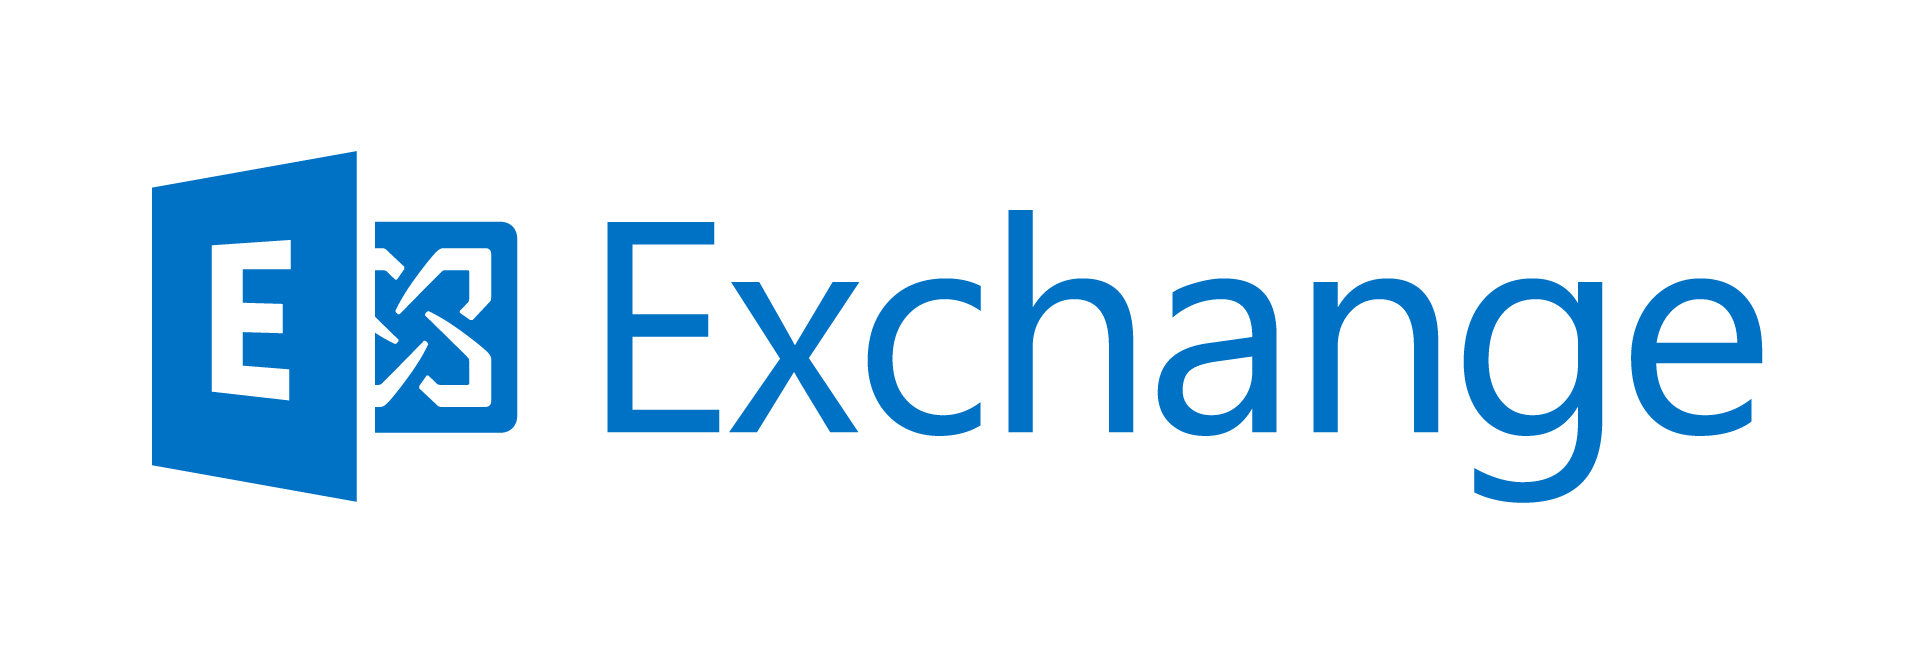 microsoft exchange logo png what is microsoft exchange 1913 - Email Service Drive, Online Office, Audio & Video Calls and more..